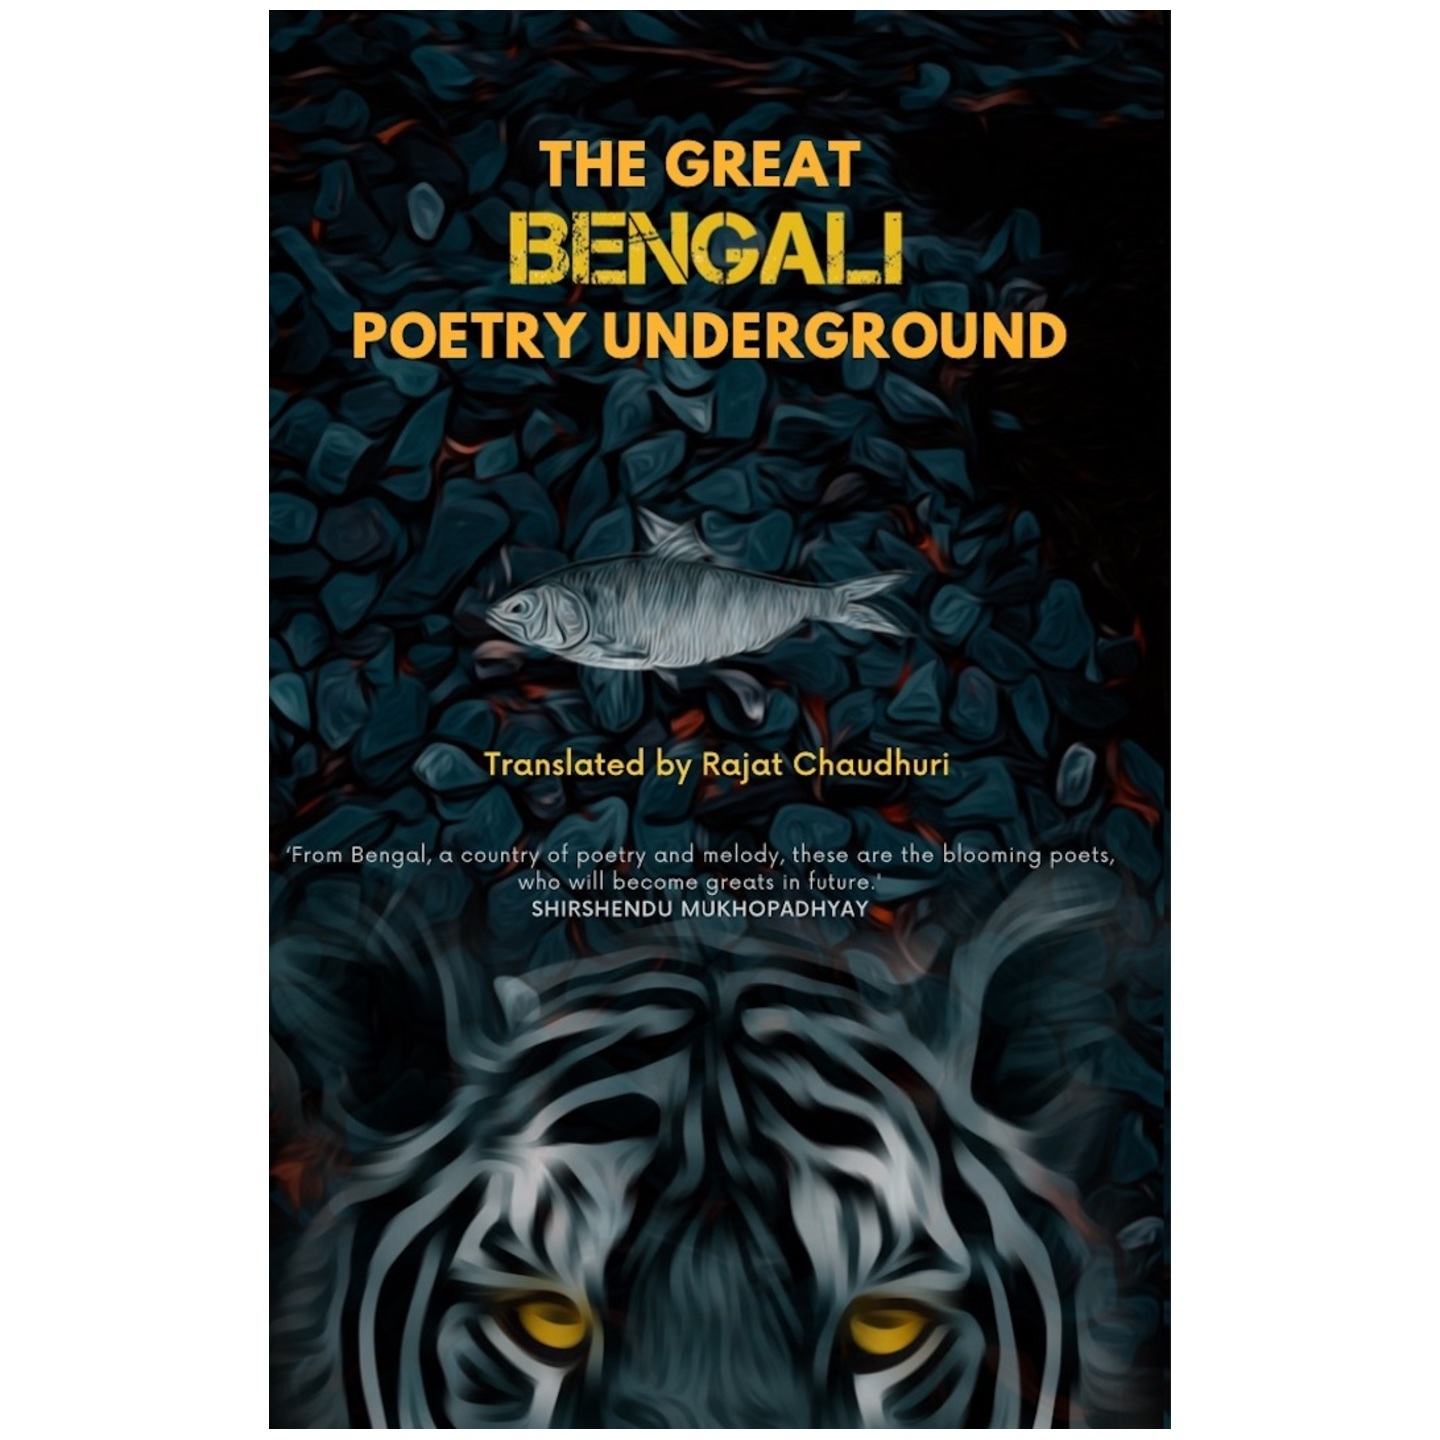 Pre-order The Great Bengali Poetry Underground Translated by Rajat Chaudhuri